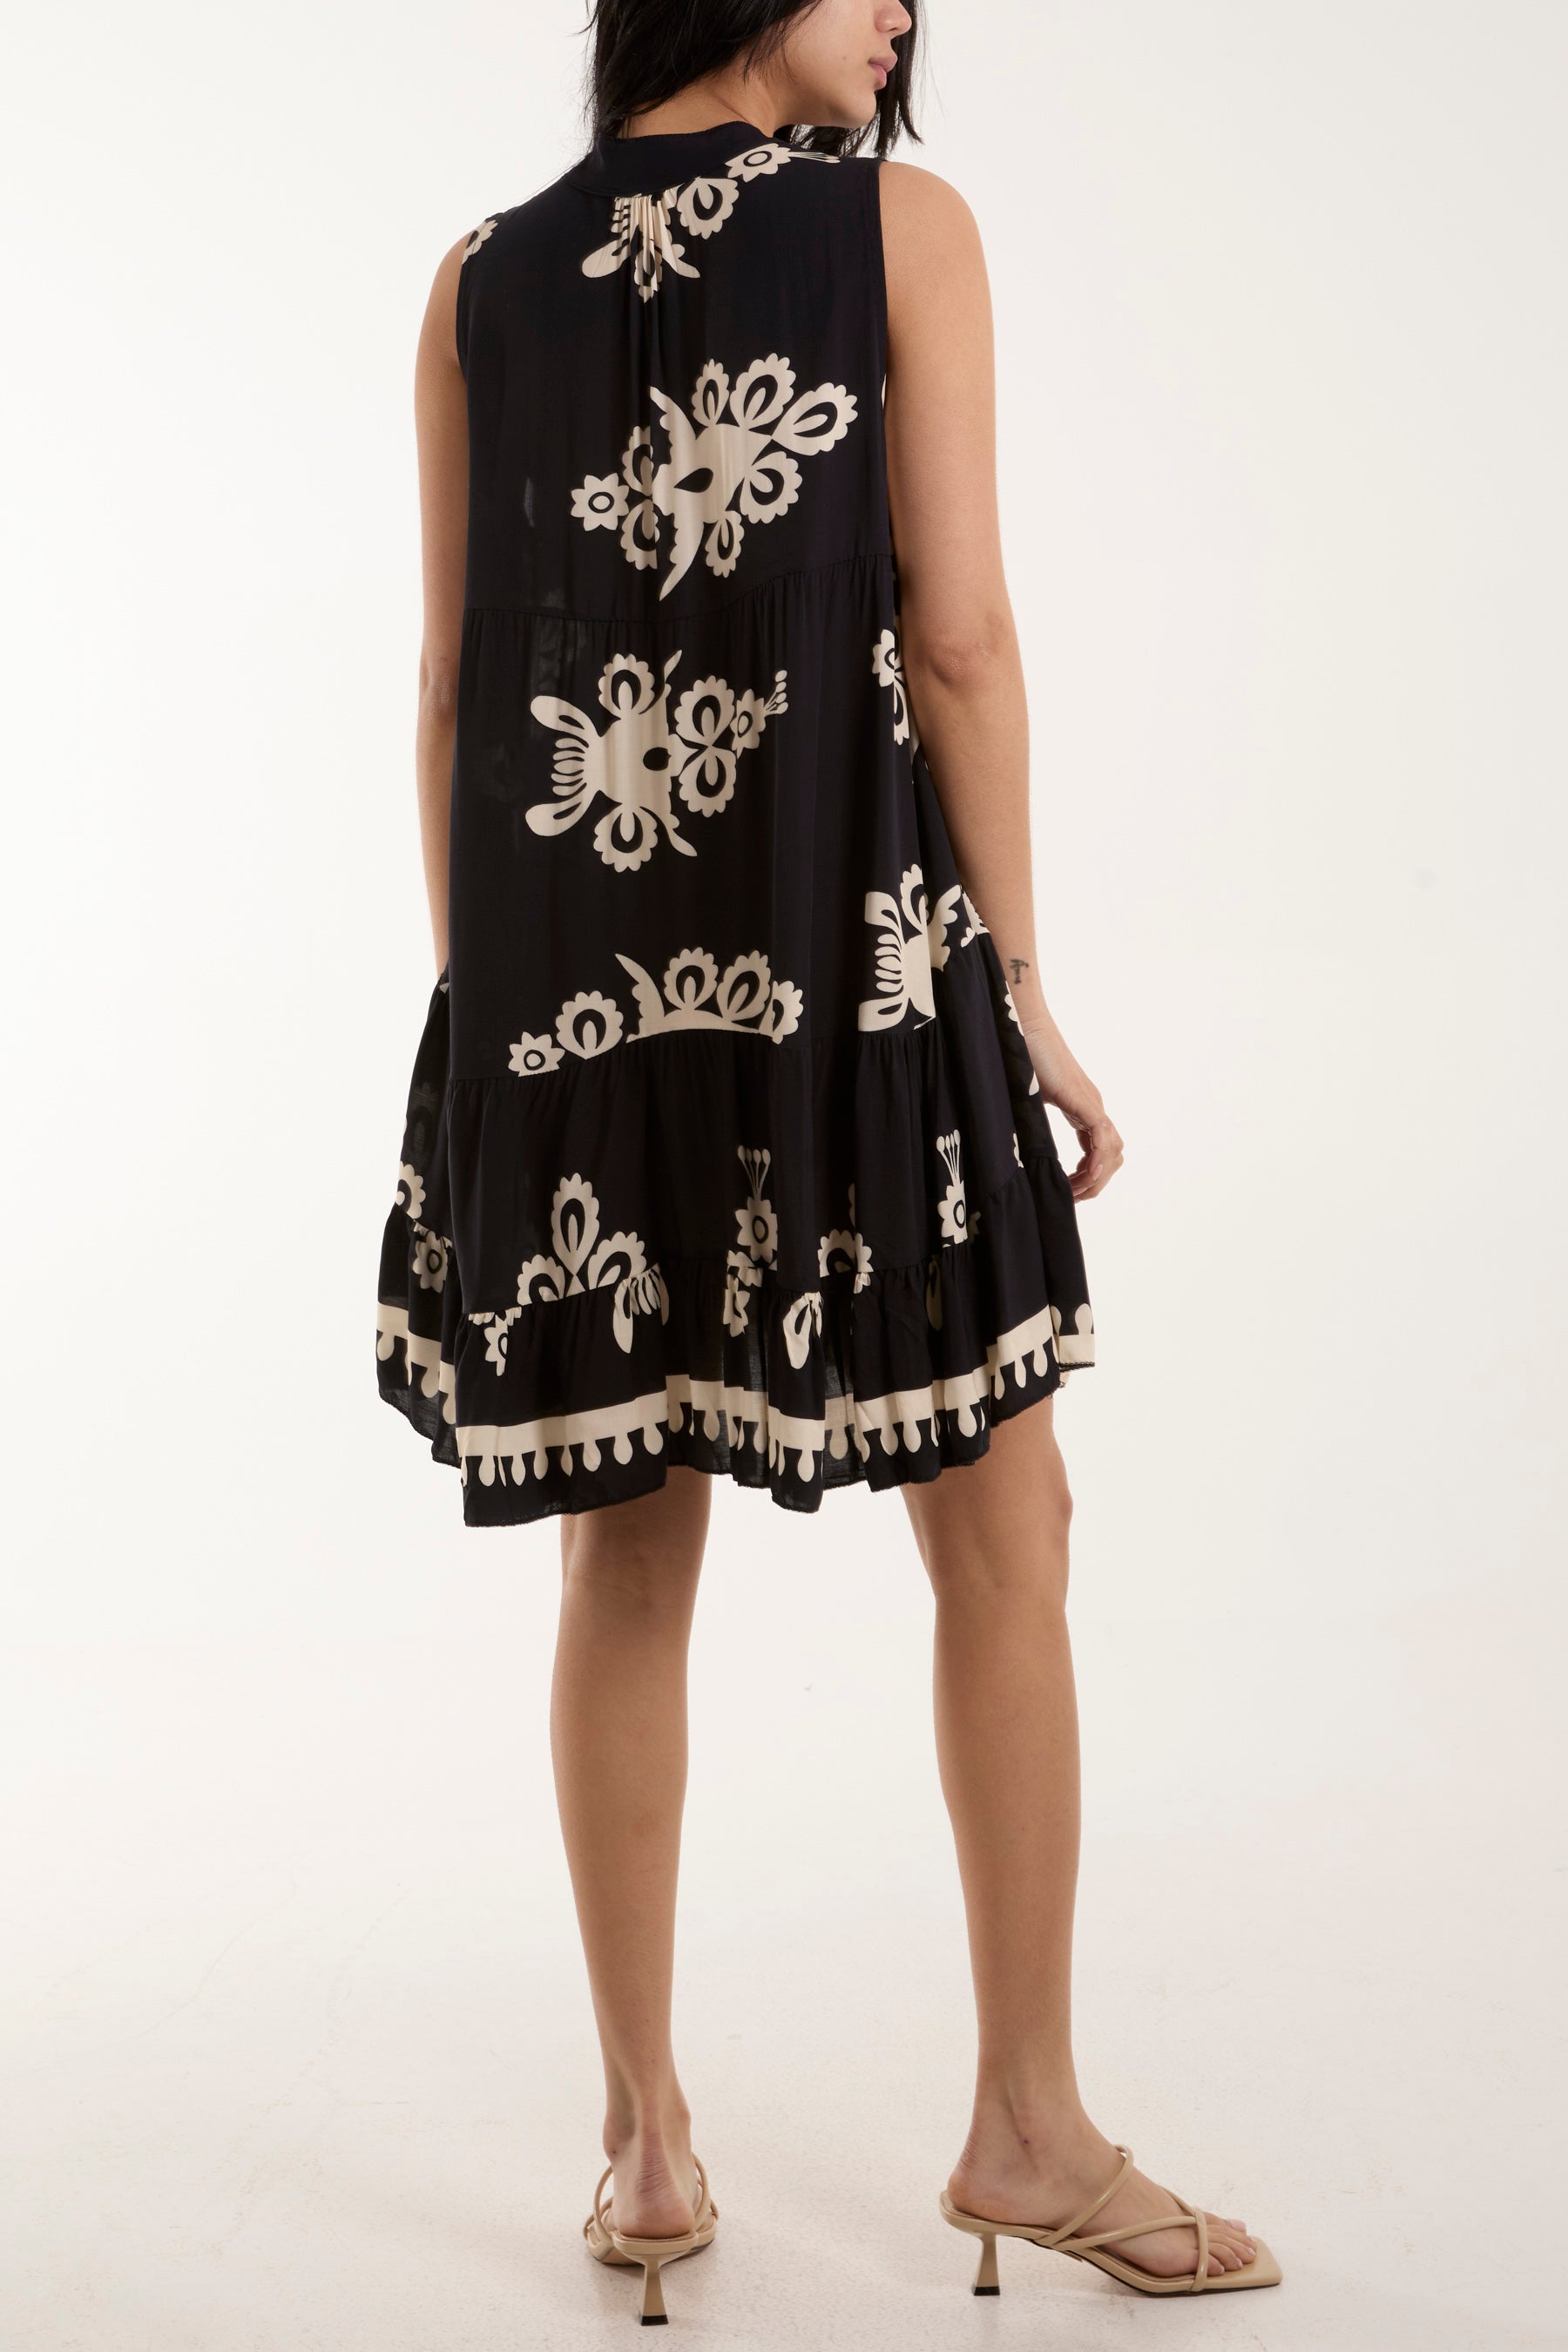 Sleeveless Tiered Placement Print Dress